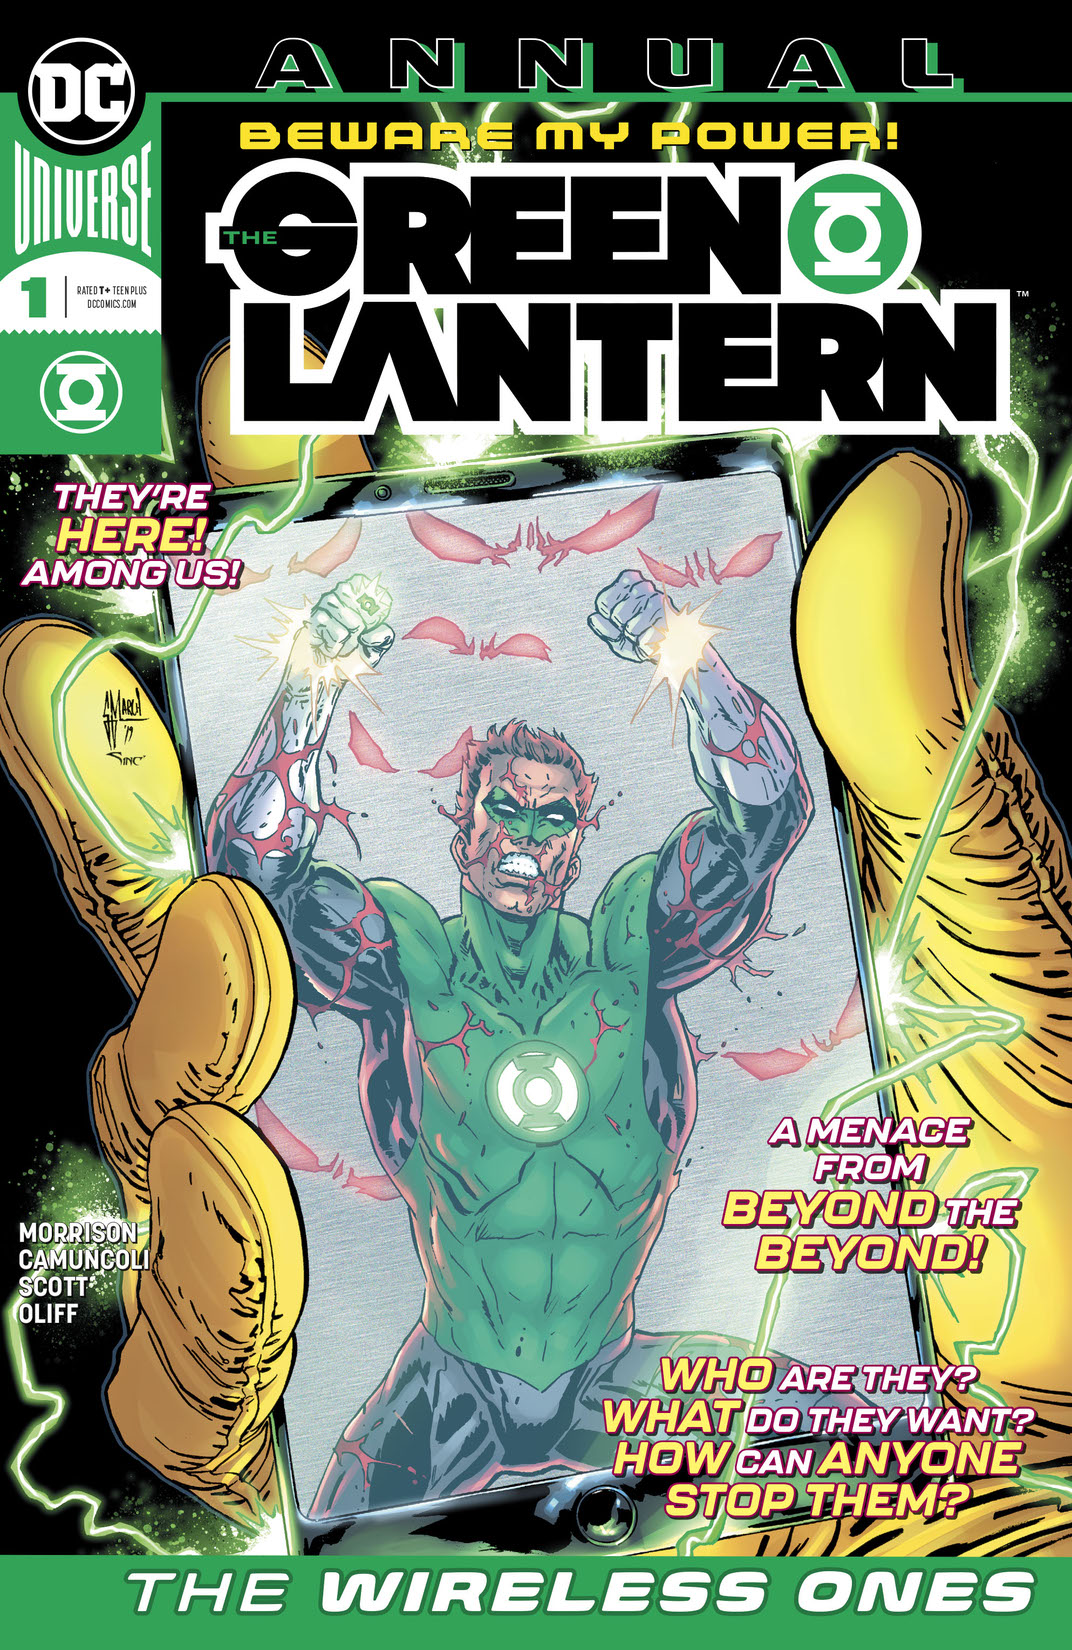 The Green Lantern Annual (2019-) #1 preview images